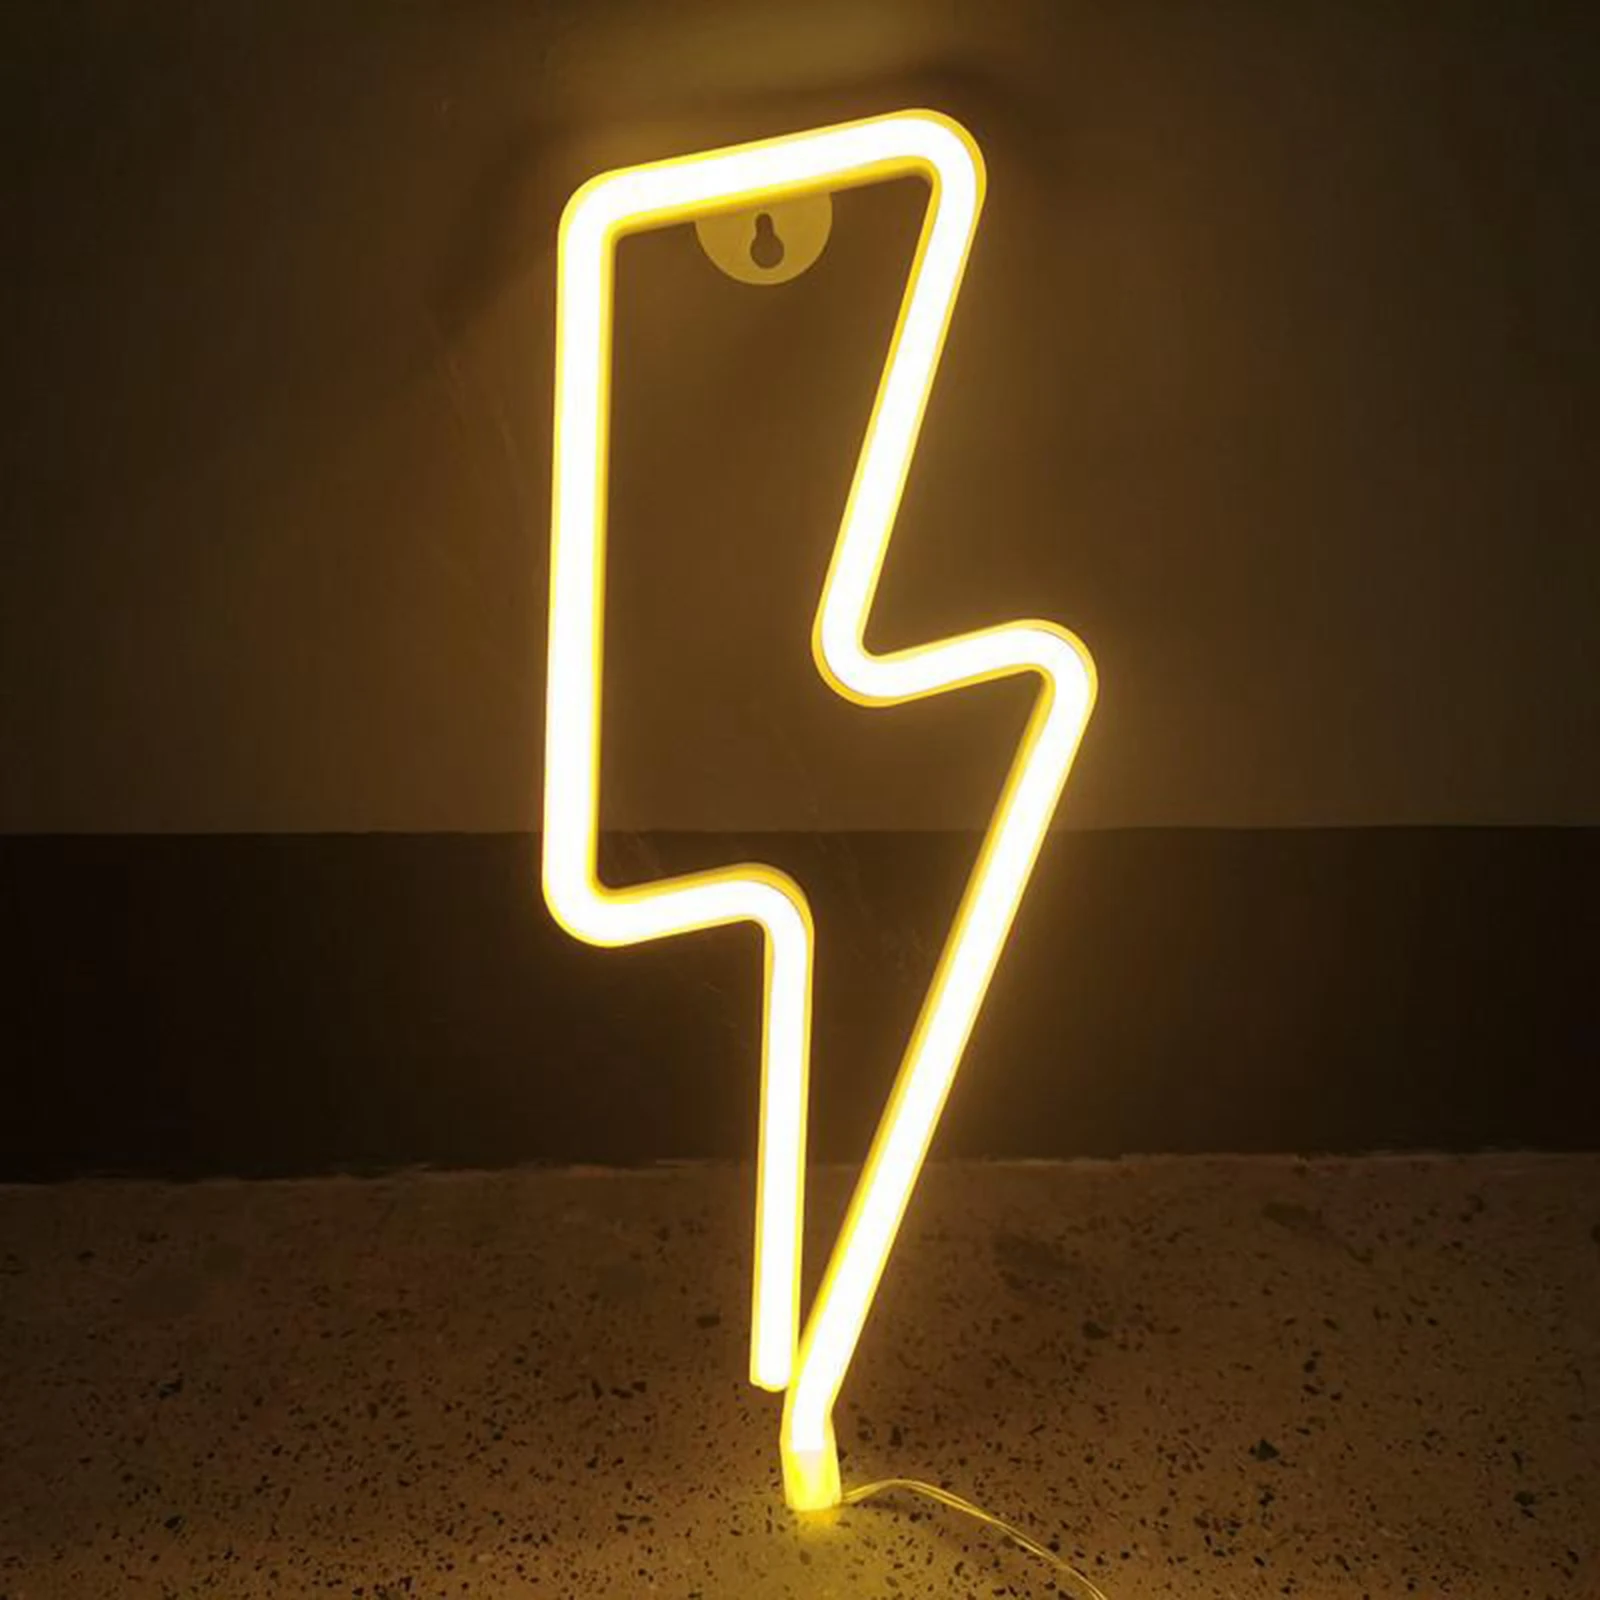 LED Home Neon Sign Lightning Shaped Wall Neon Light USB Decorative Night Light Wall Decor for Kids Baby Room Wedding Party